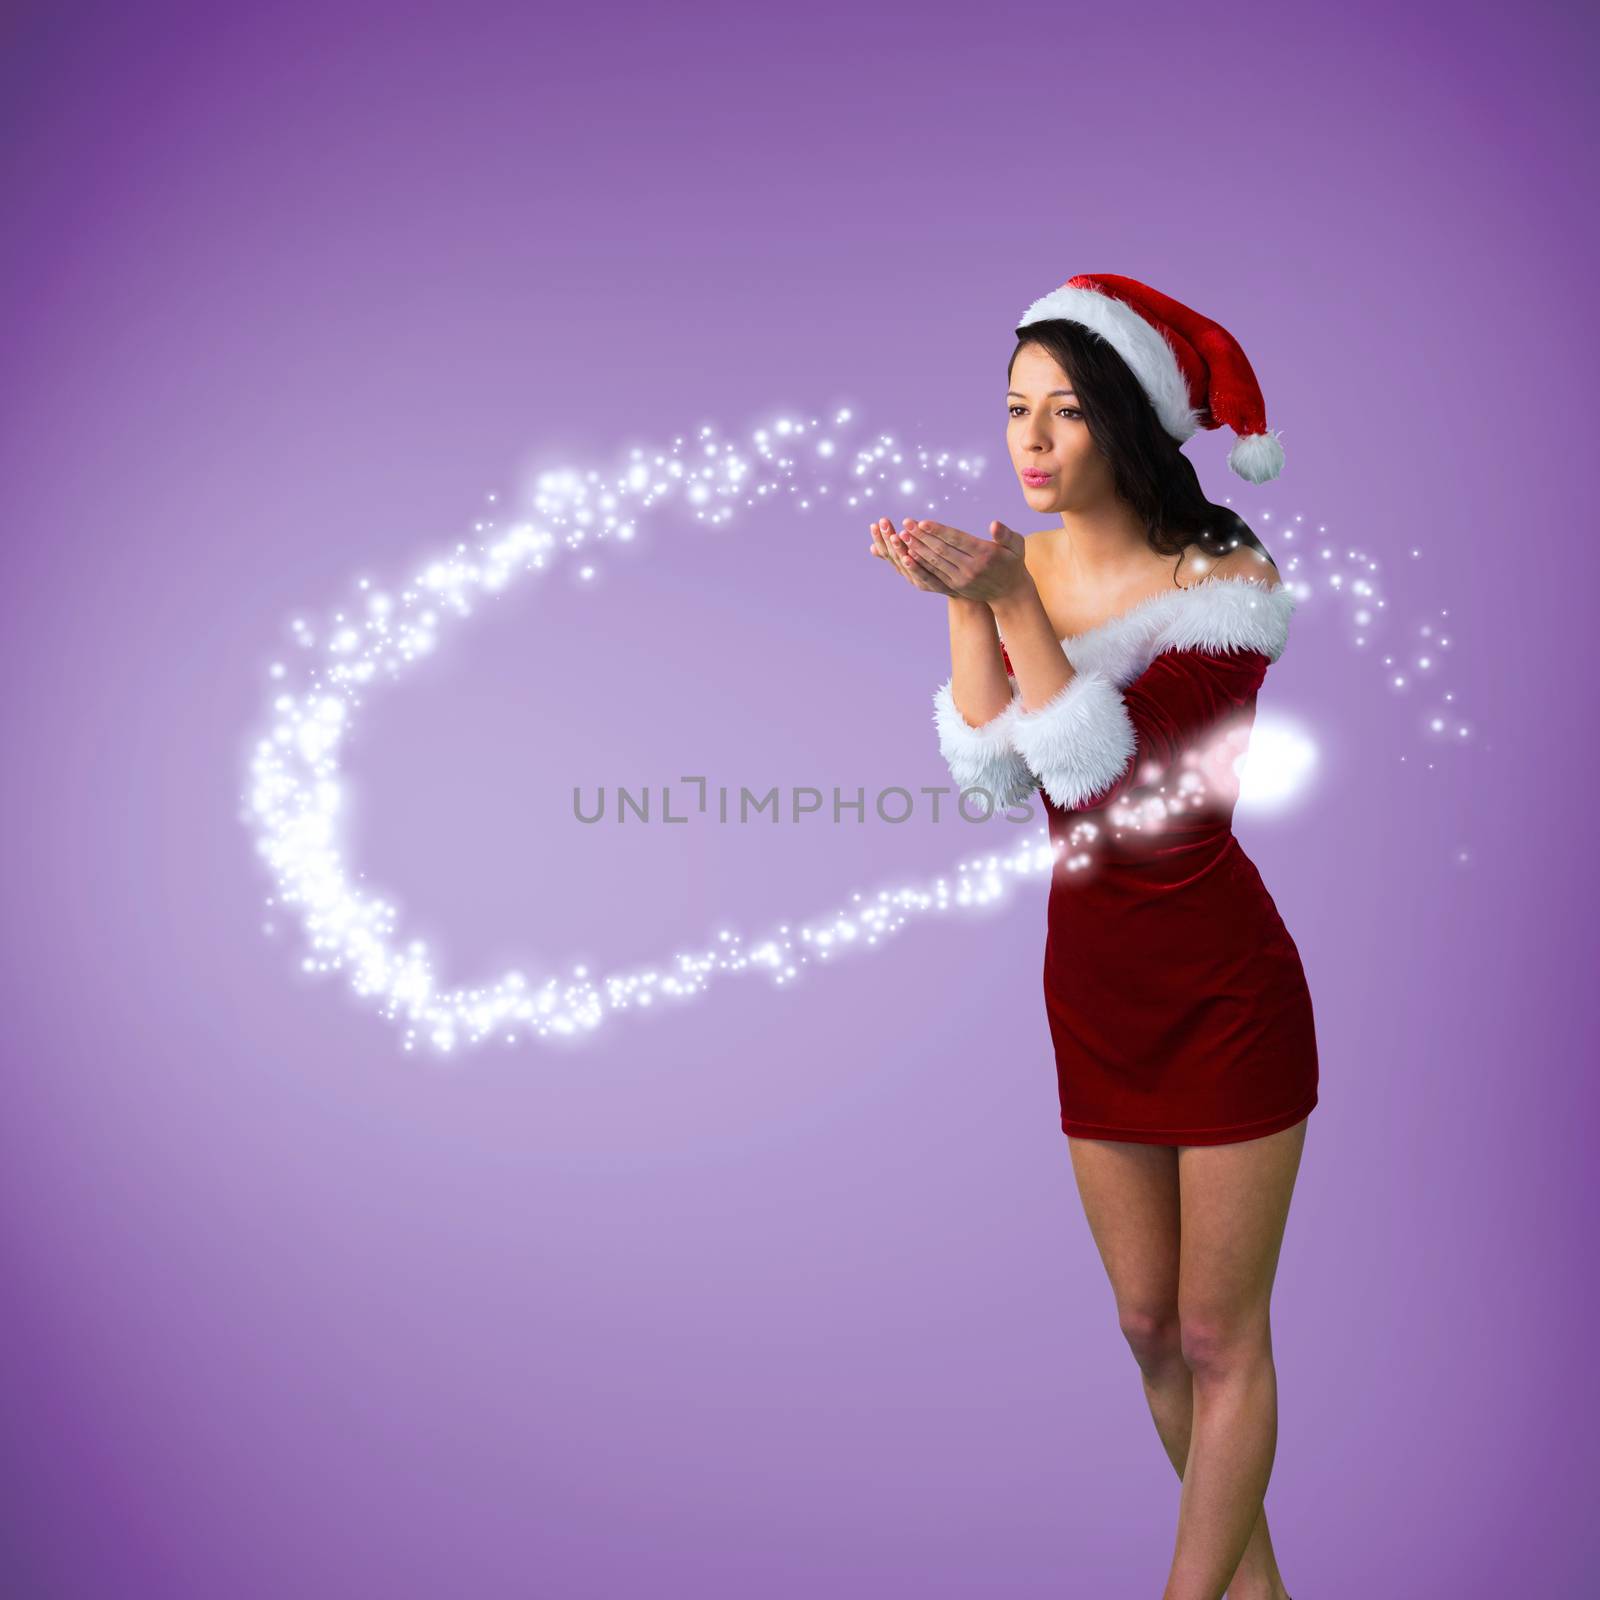 Pretty girl in santa outfit blowing against purple vignette